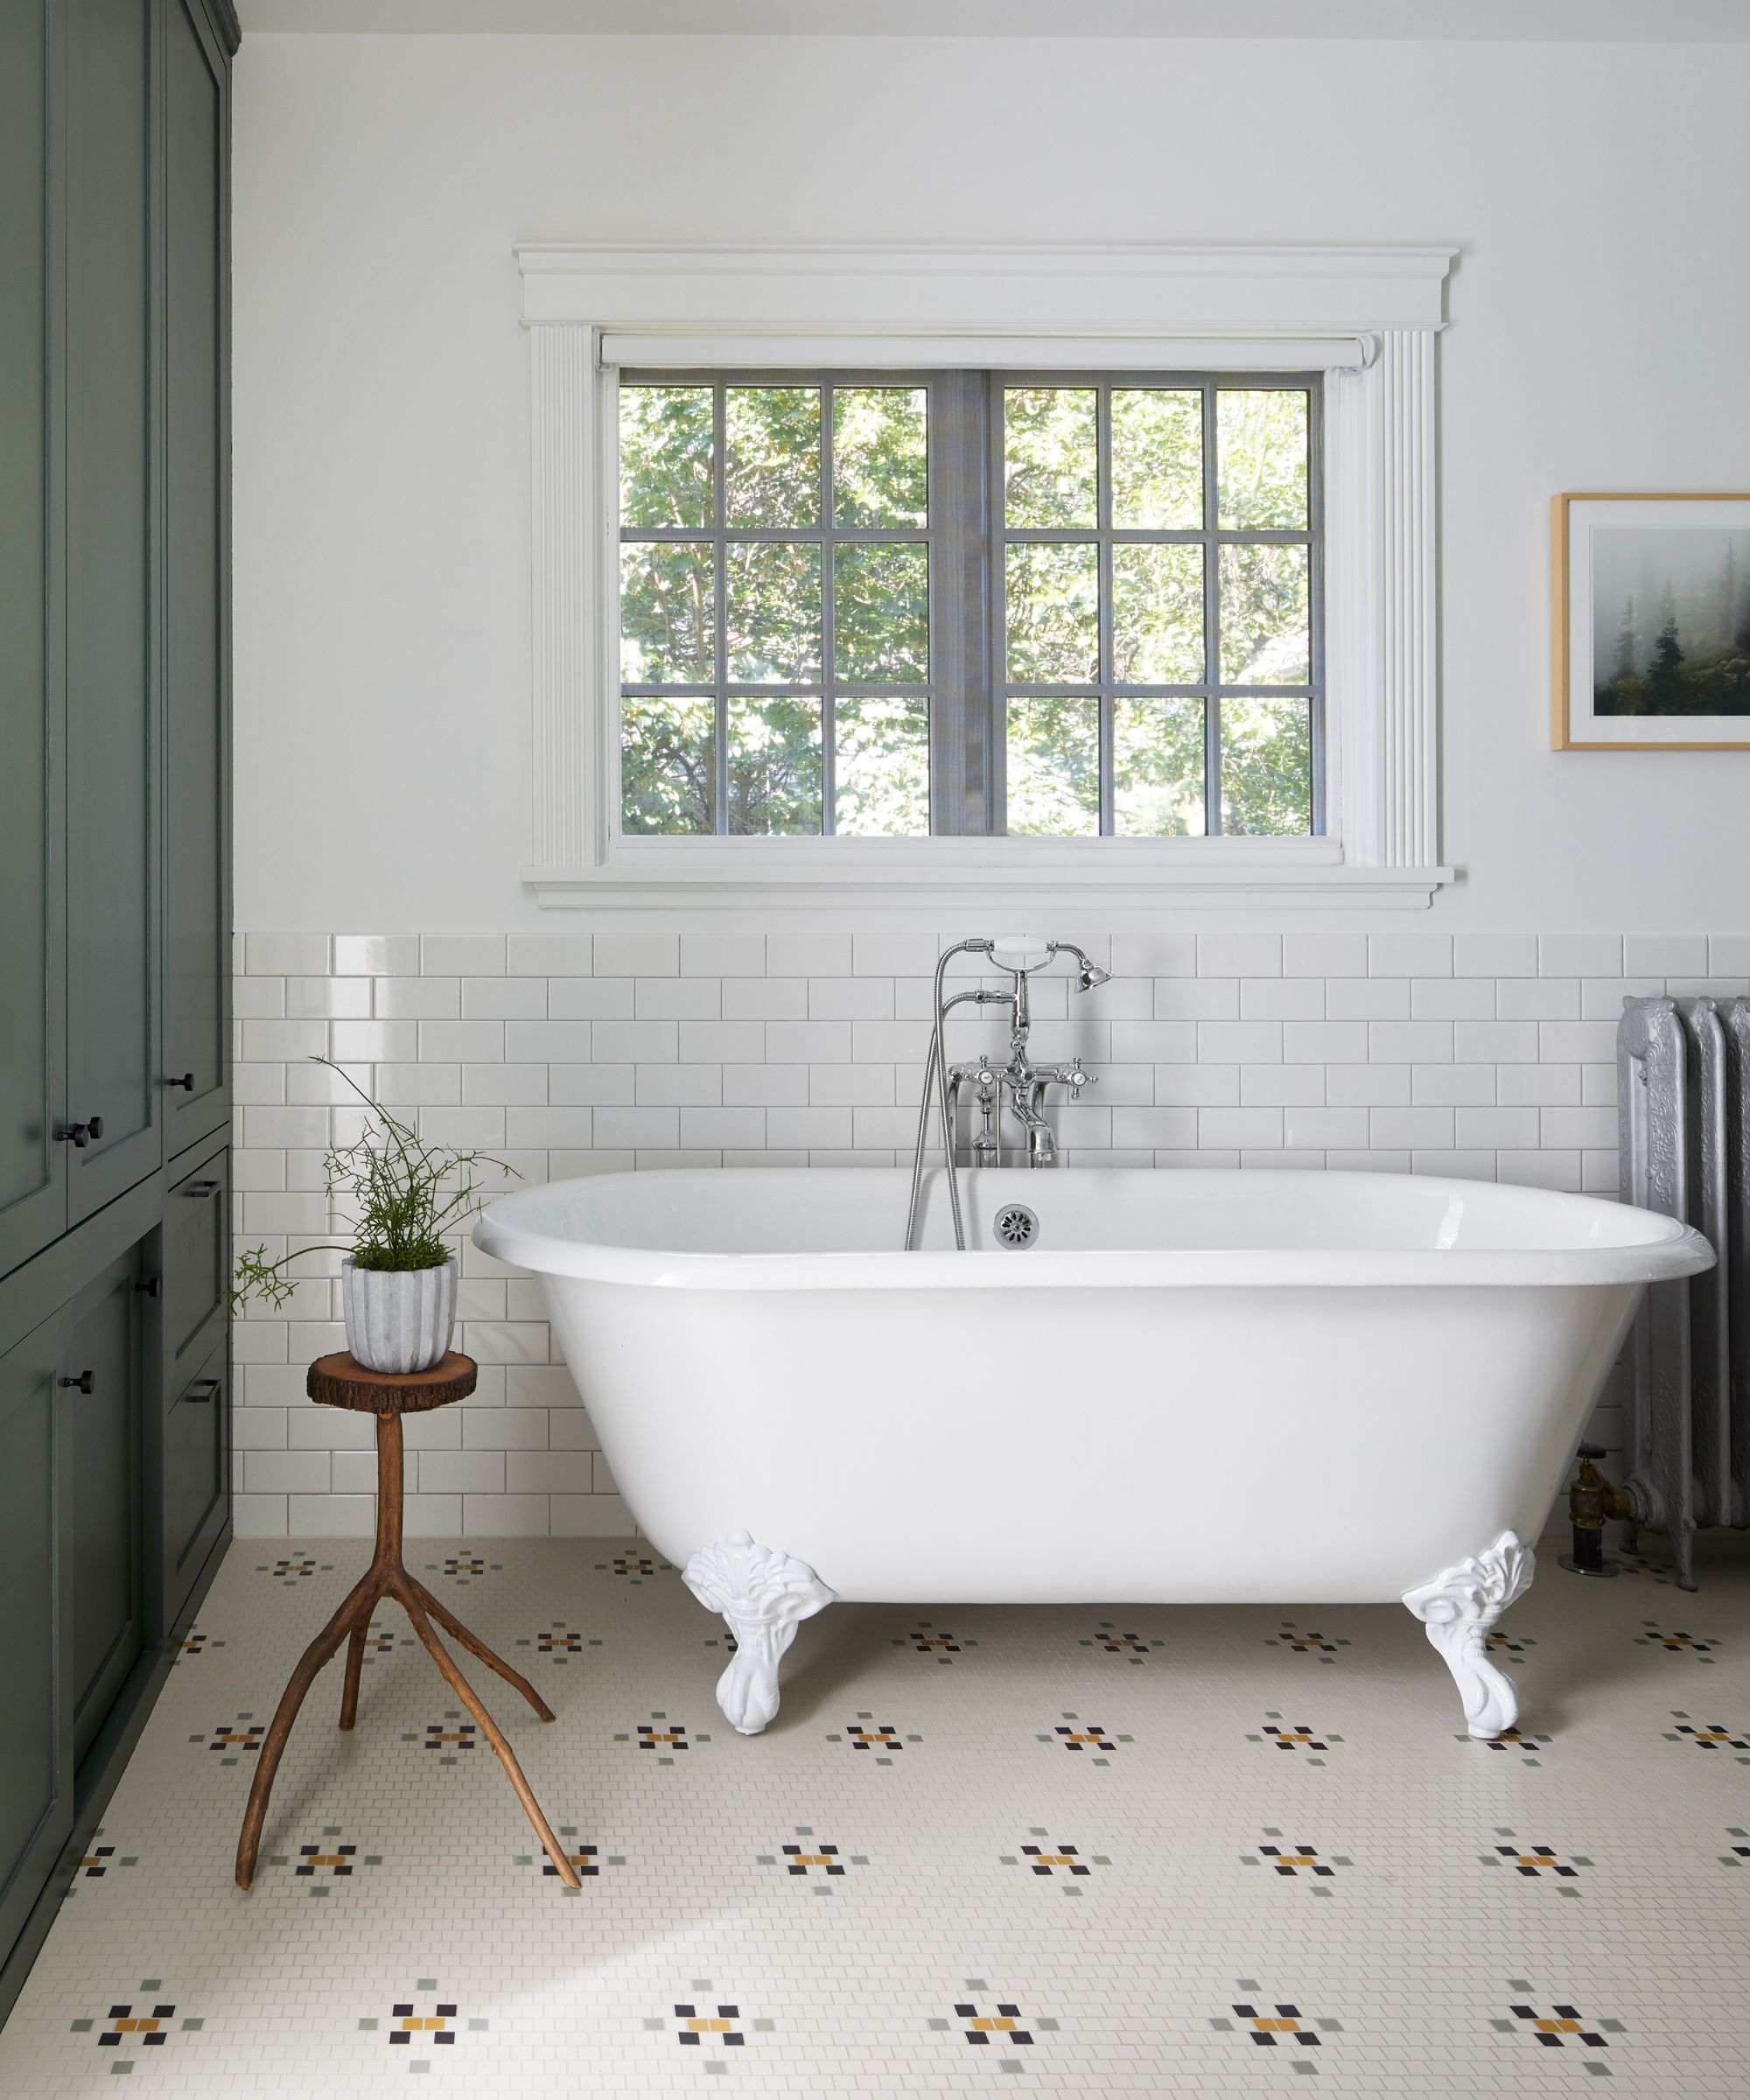 A bathroom with a freestanding bathtub and patterned tile on the ground